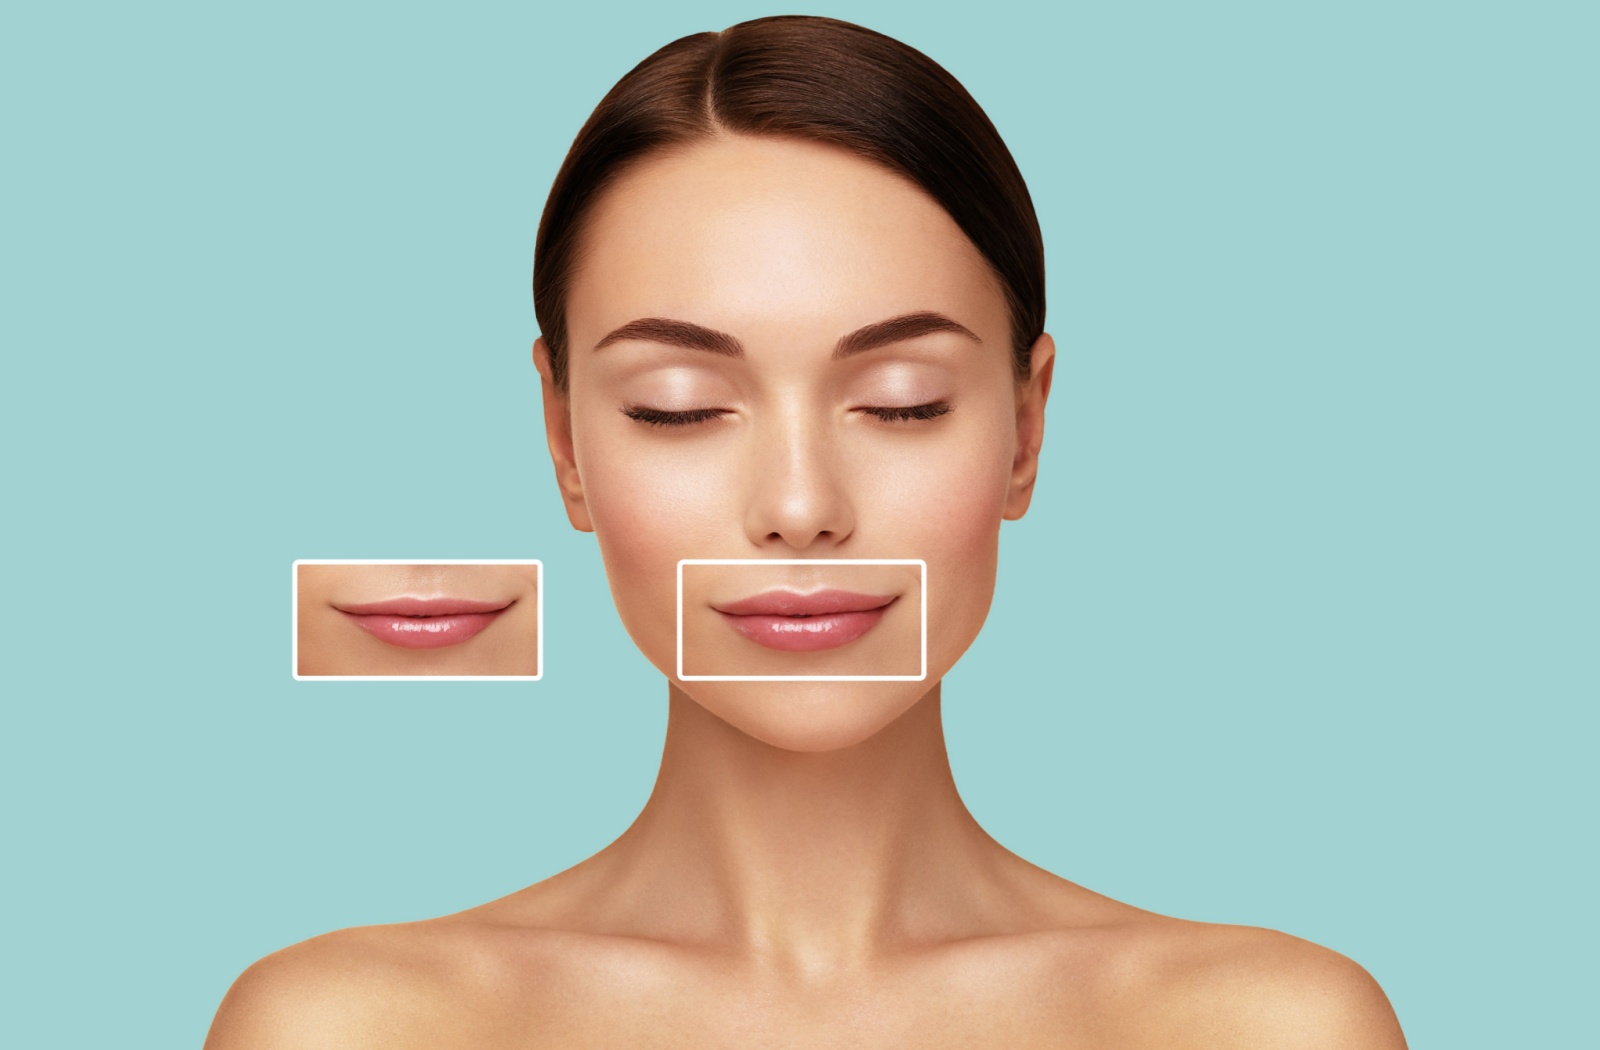 What Are Lip Fillers?